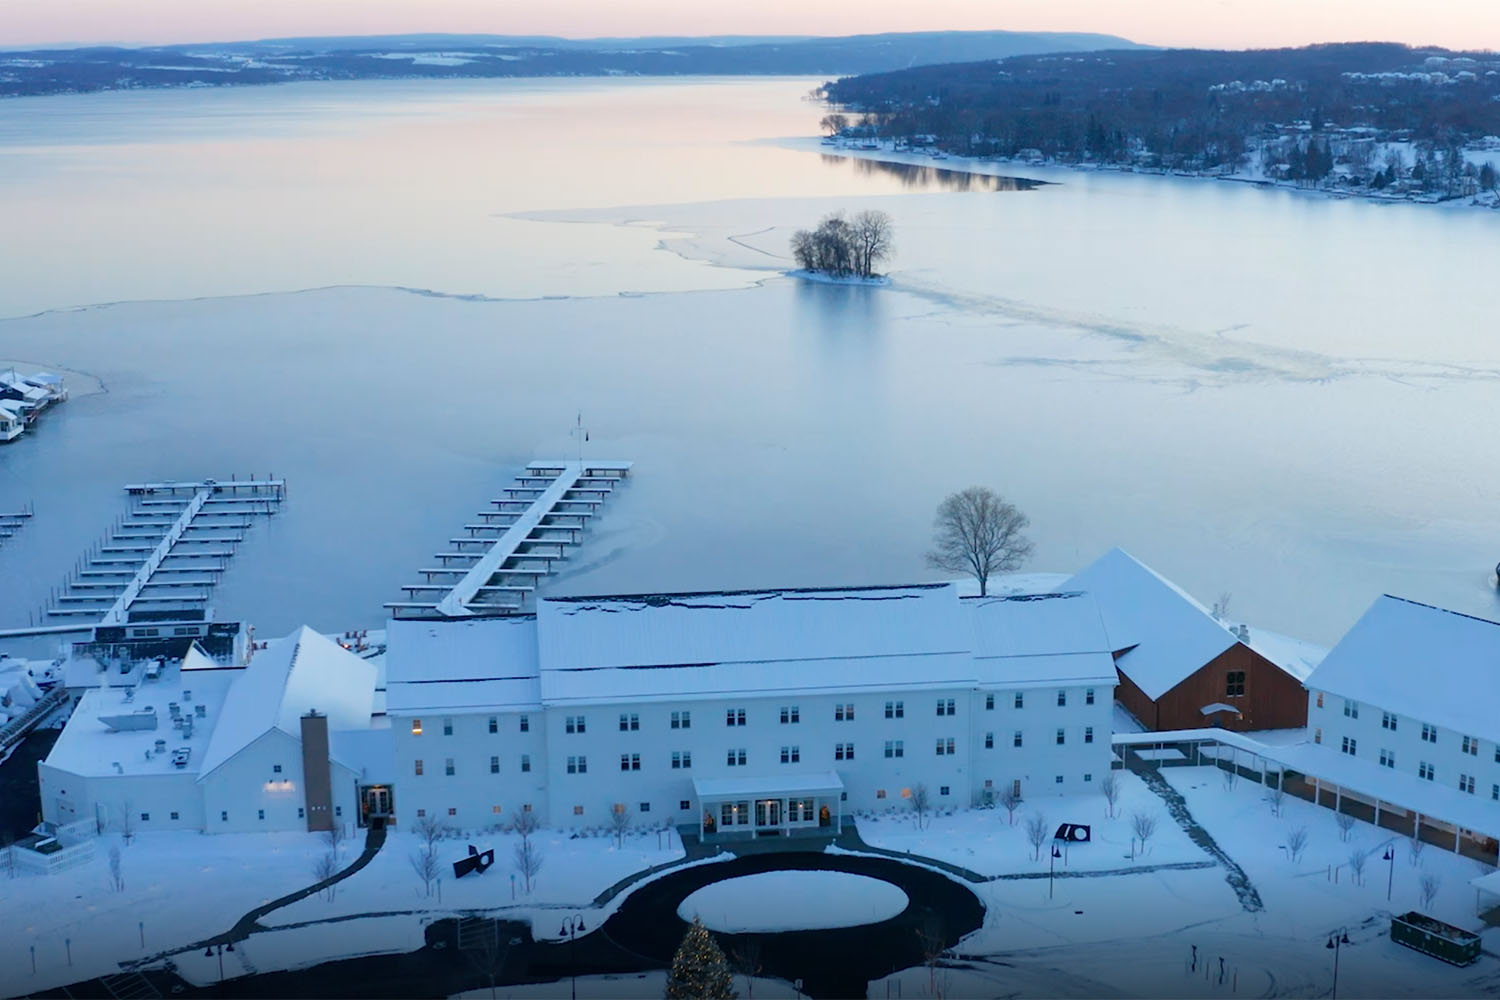 Snow-covered lakeside hotel in the Finger Lakes region of New York